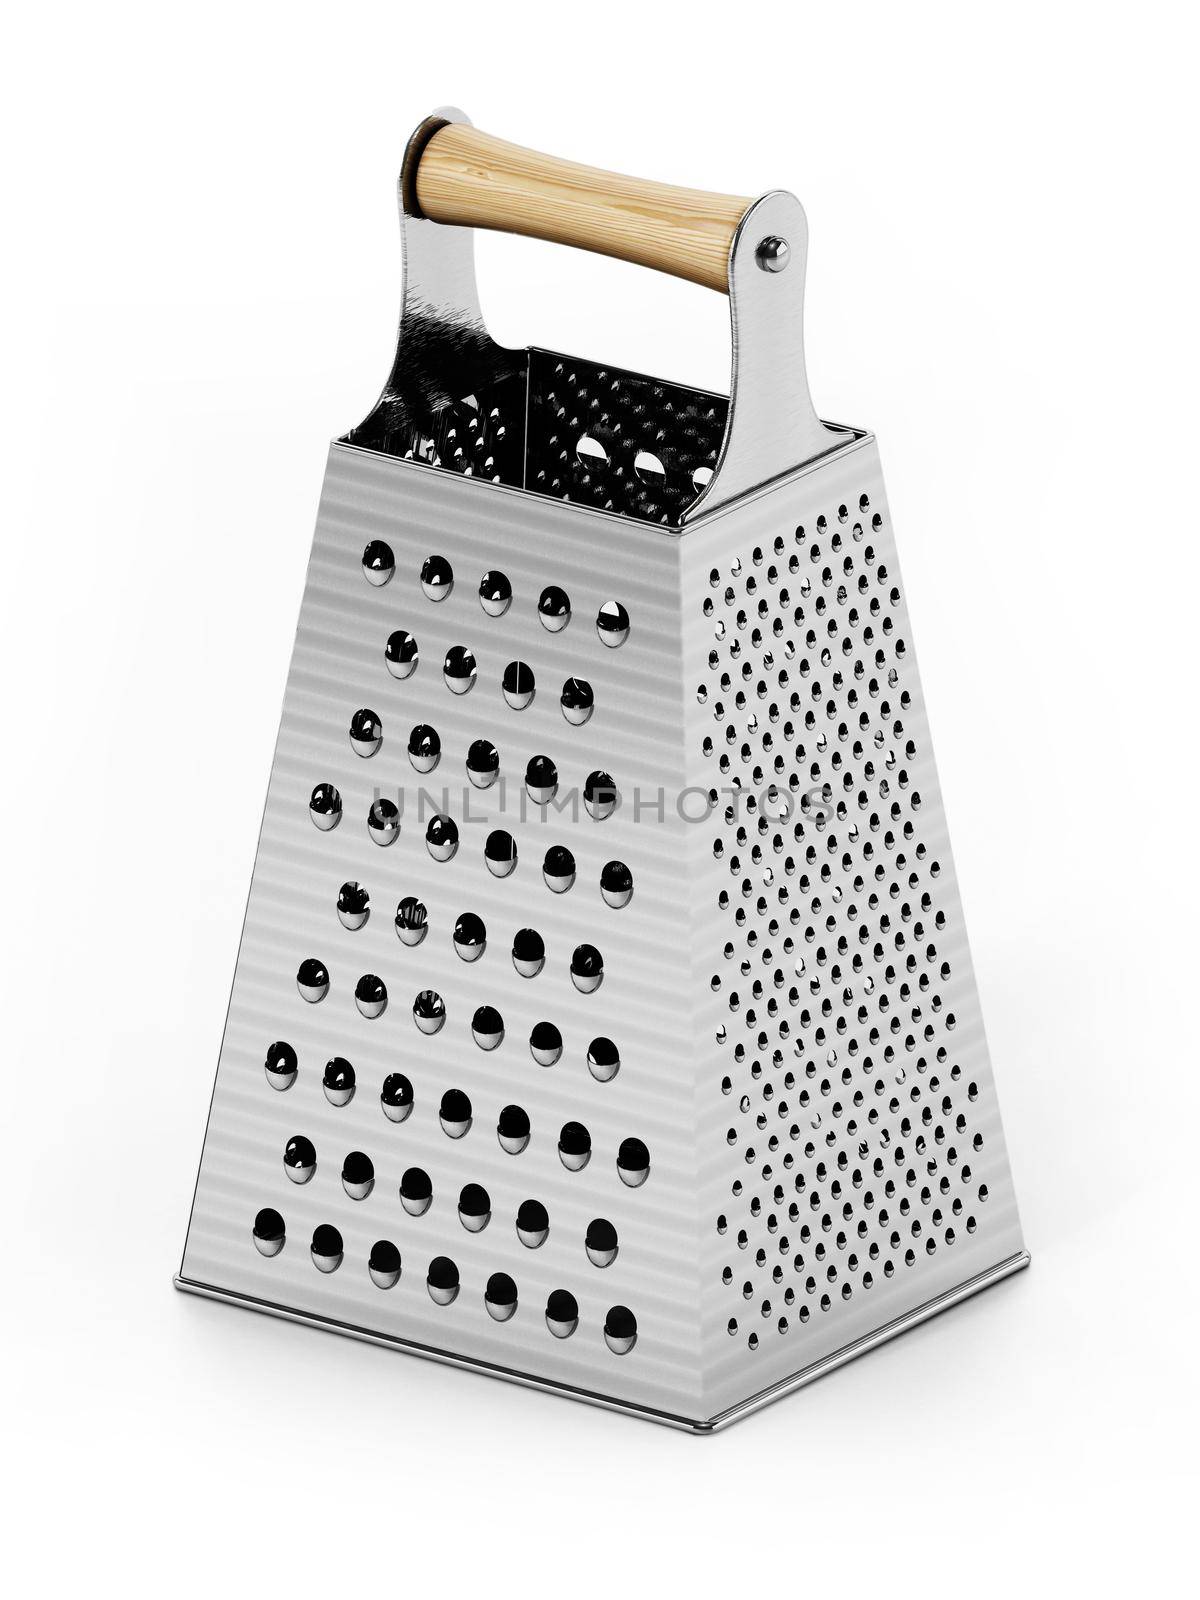 Generic kitchen grater isolated on white background. 3D illustration.